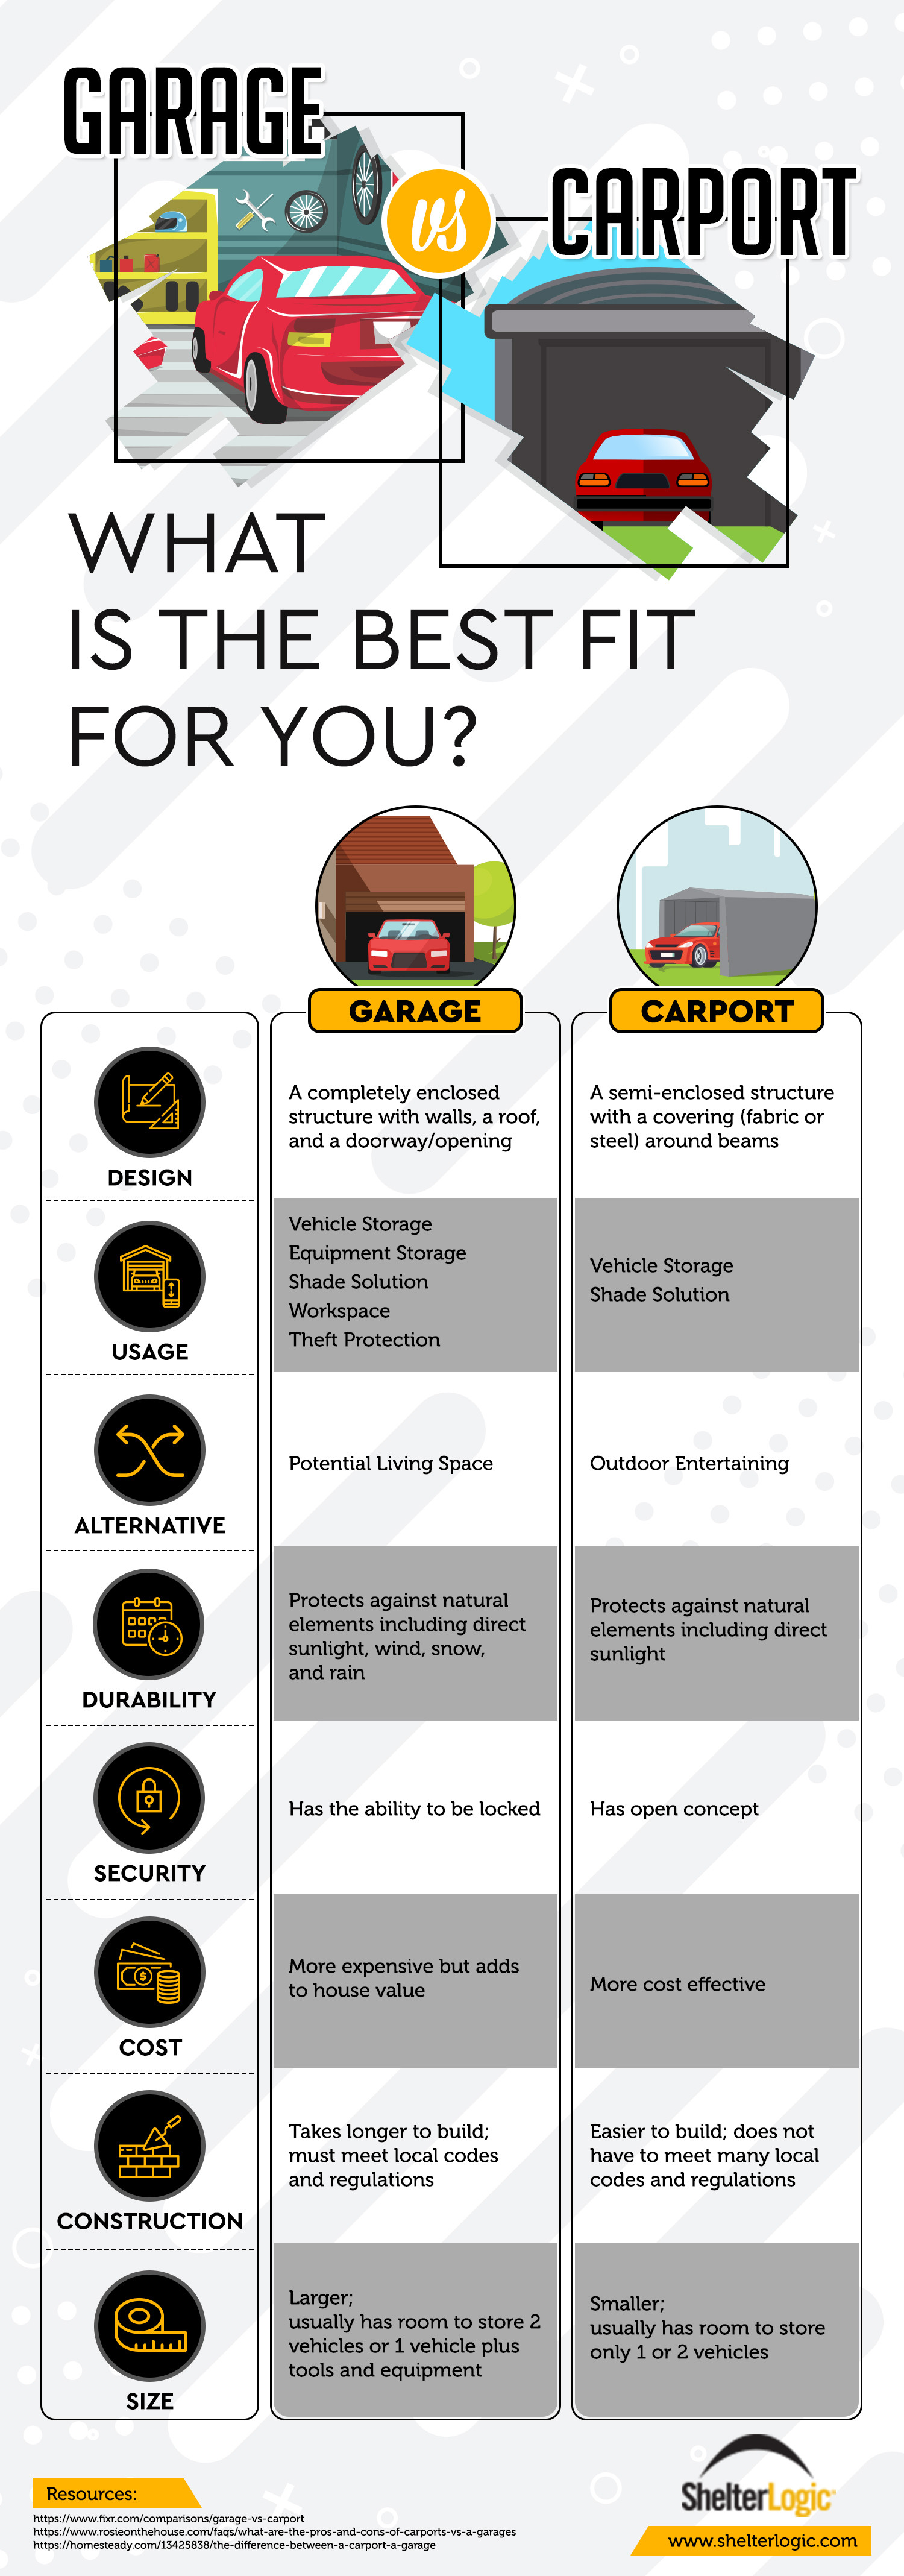 Garage v. Carport: What is the Best Fit for You? Infographic